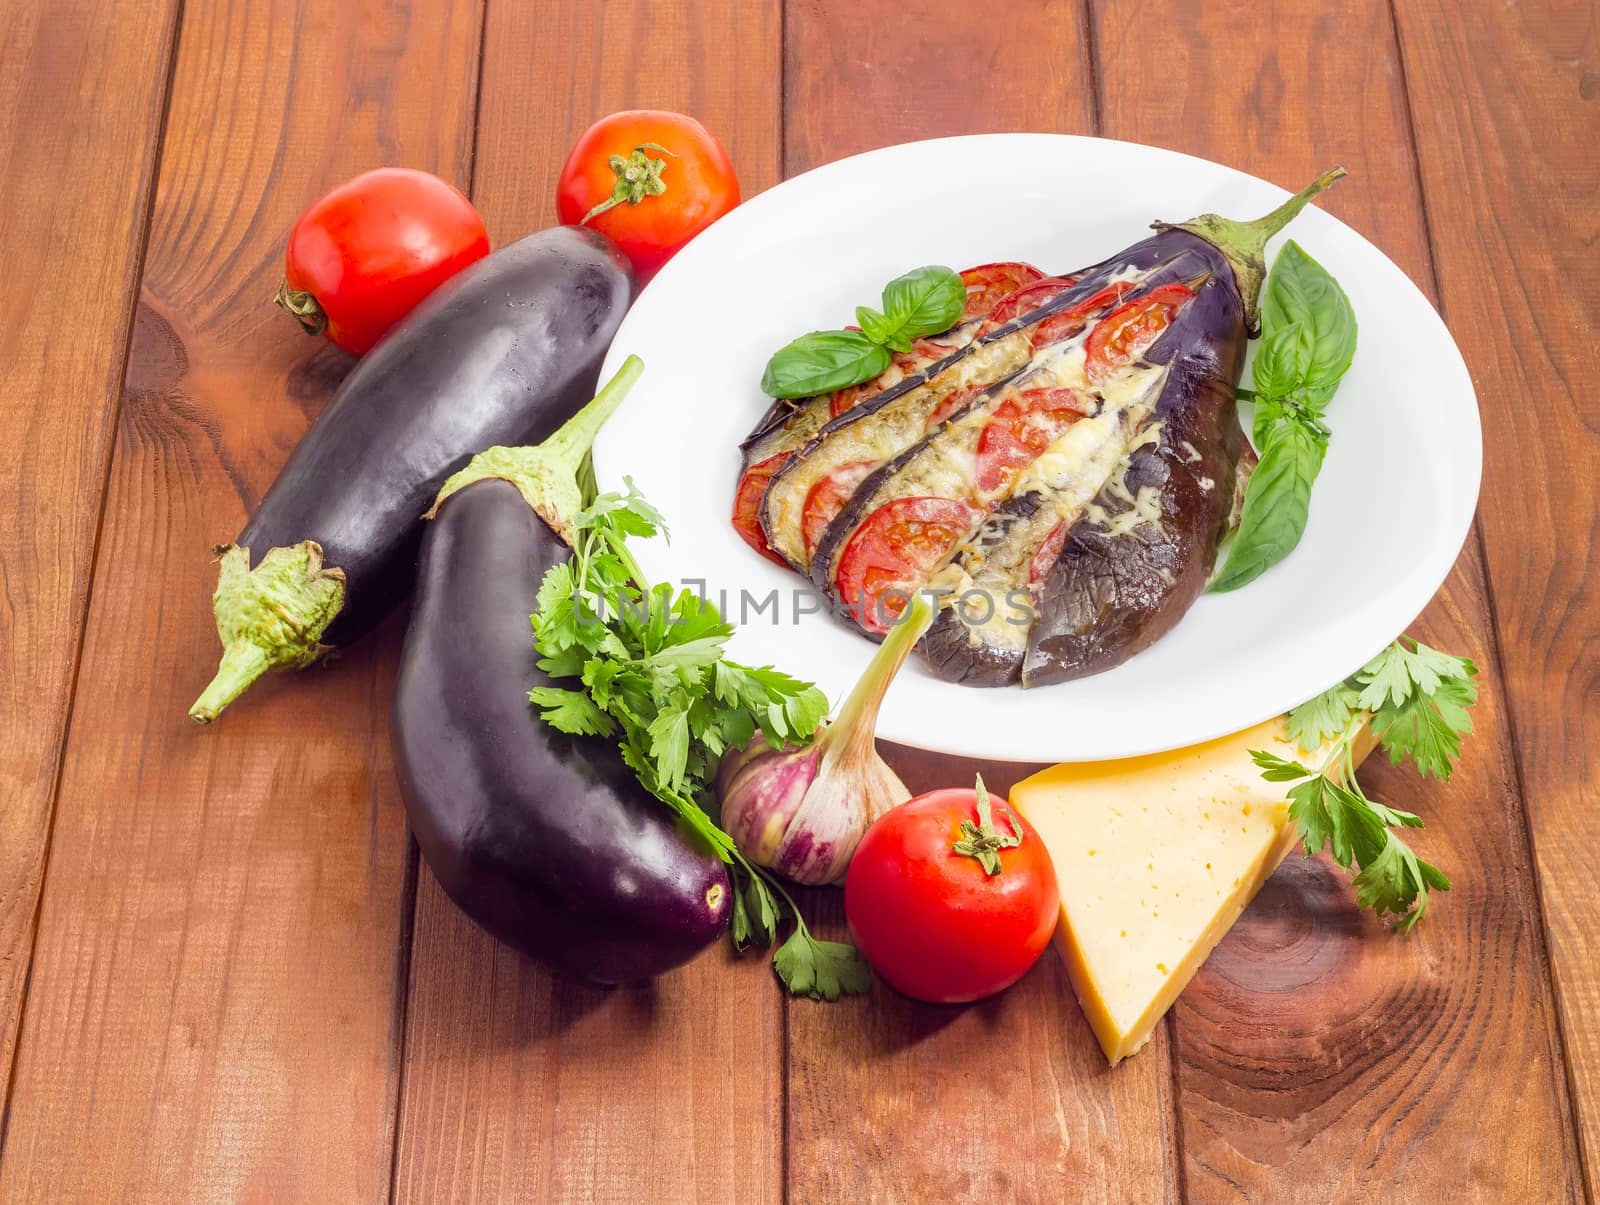 Baked stuffed eggplant and ingredients for its cooking by anmbph